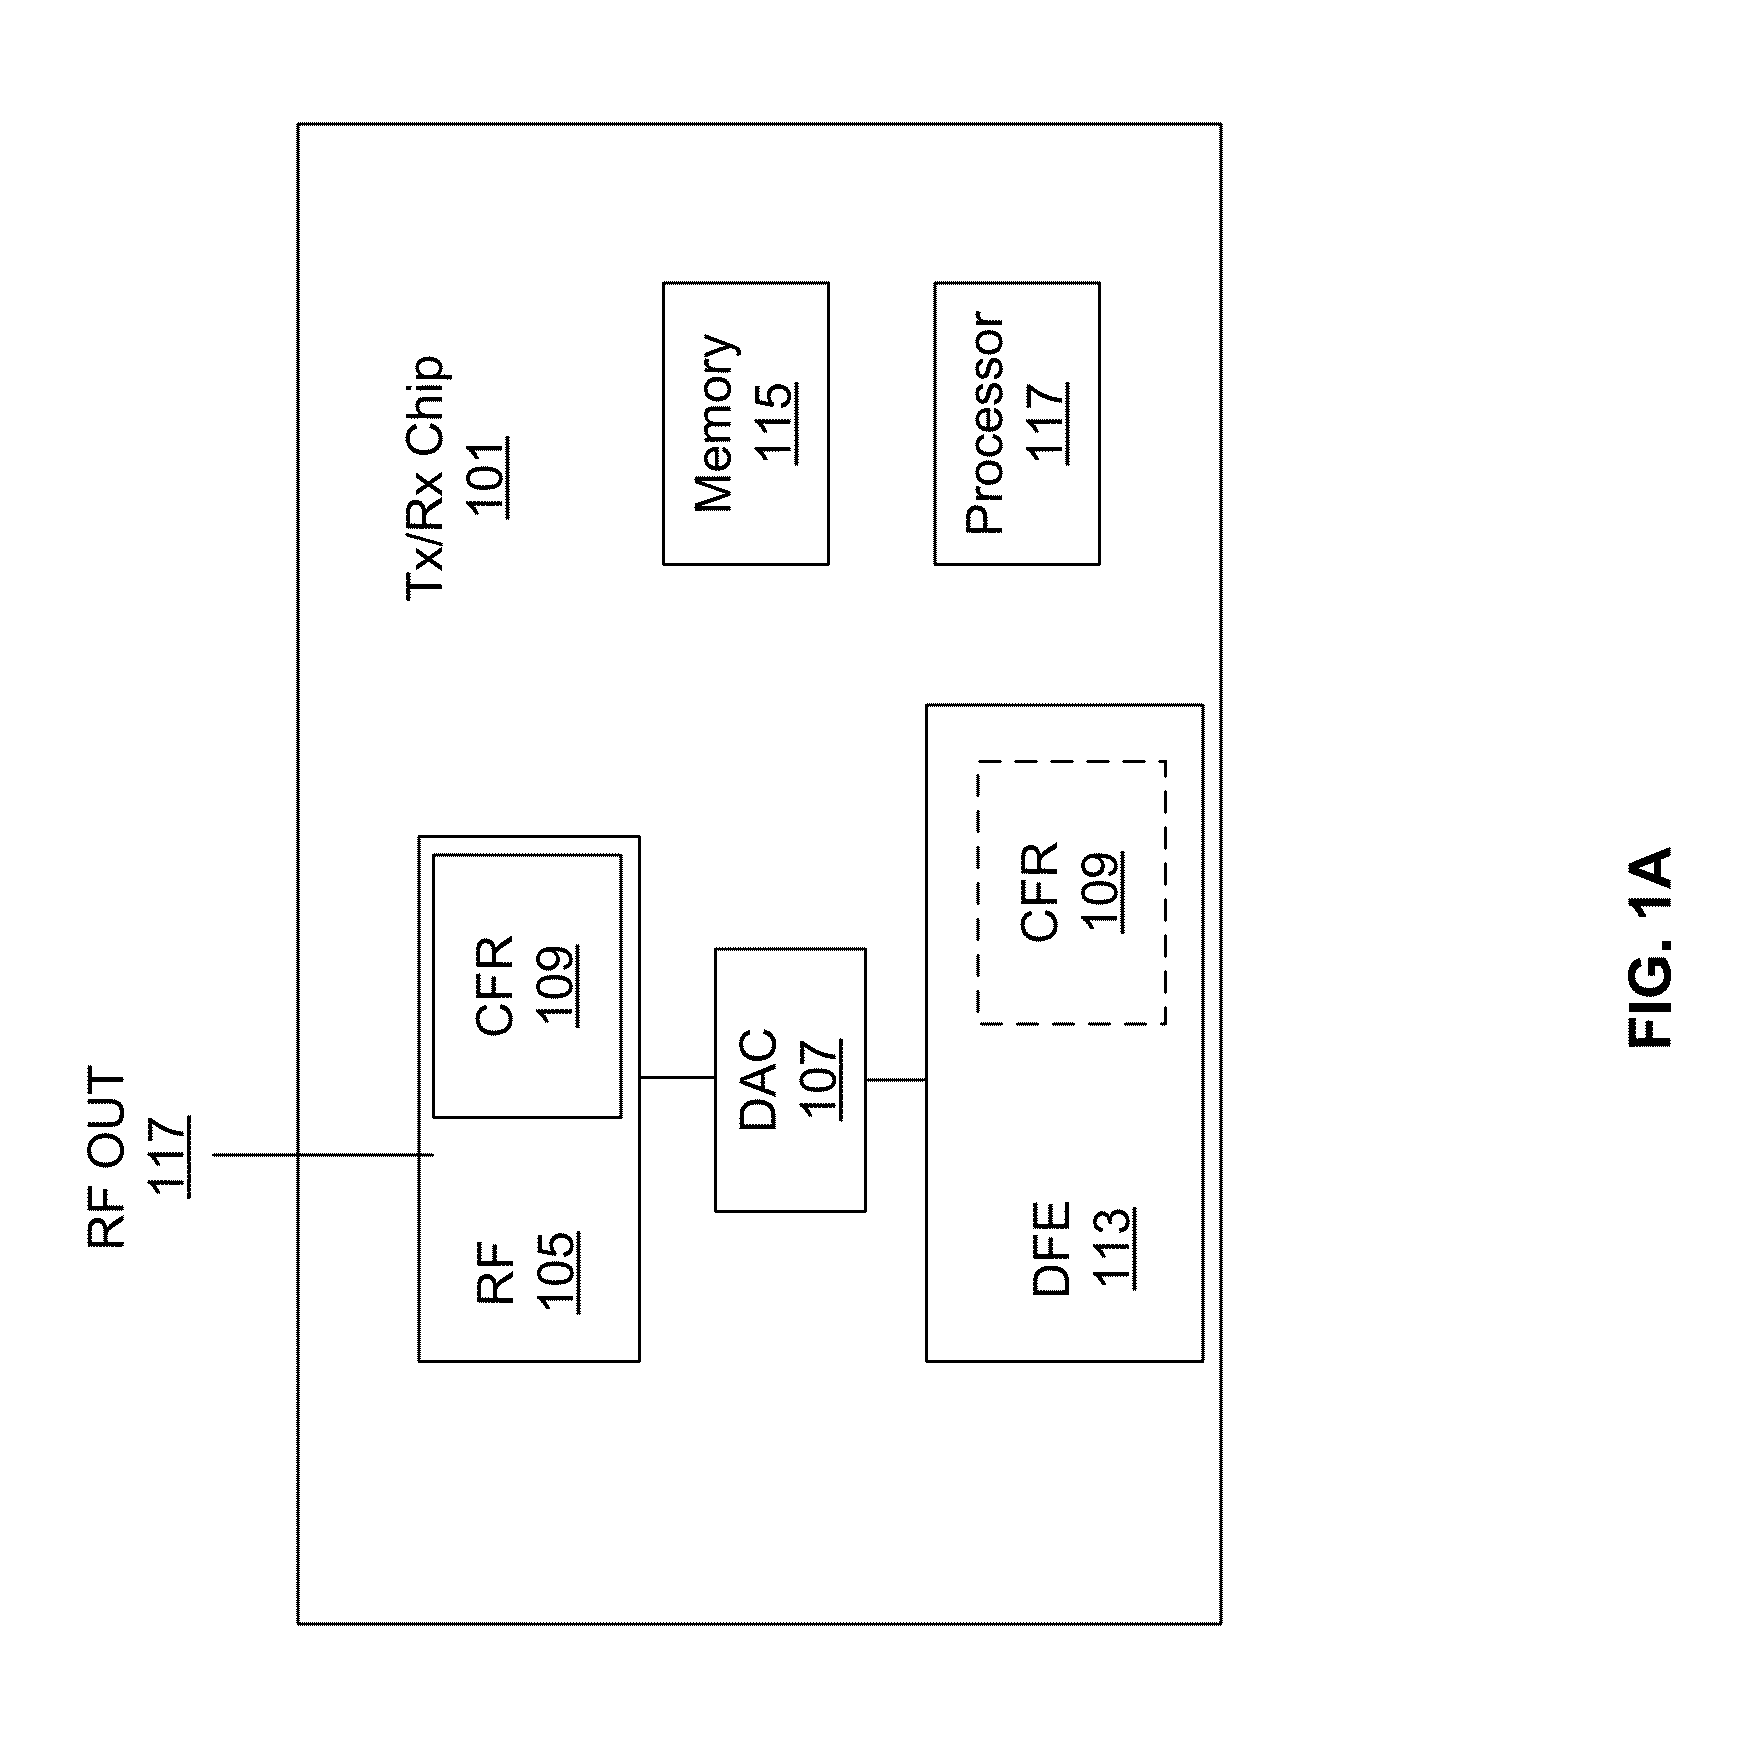 Method and system for crest factor reduction